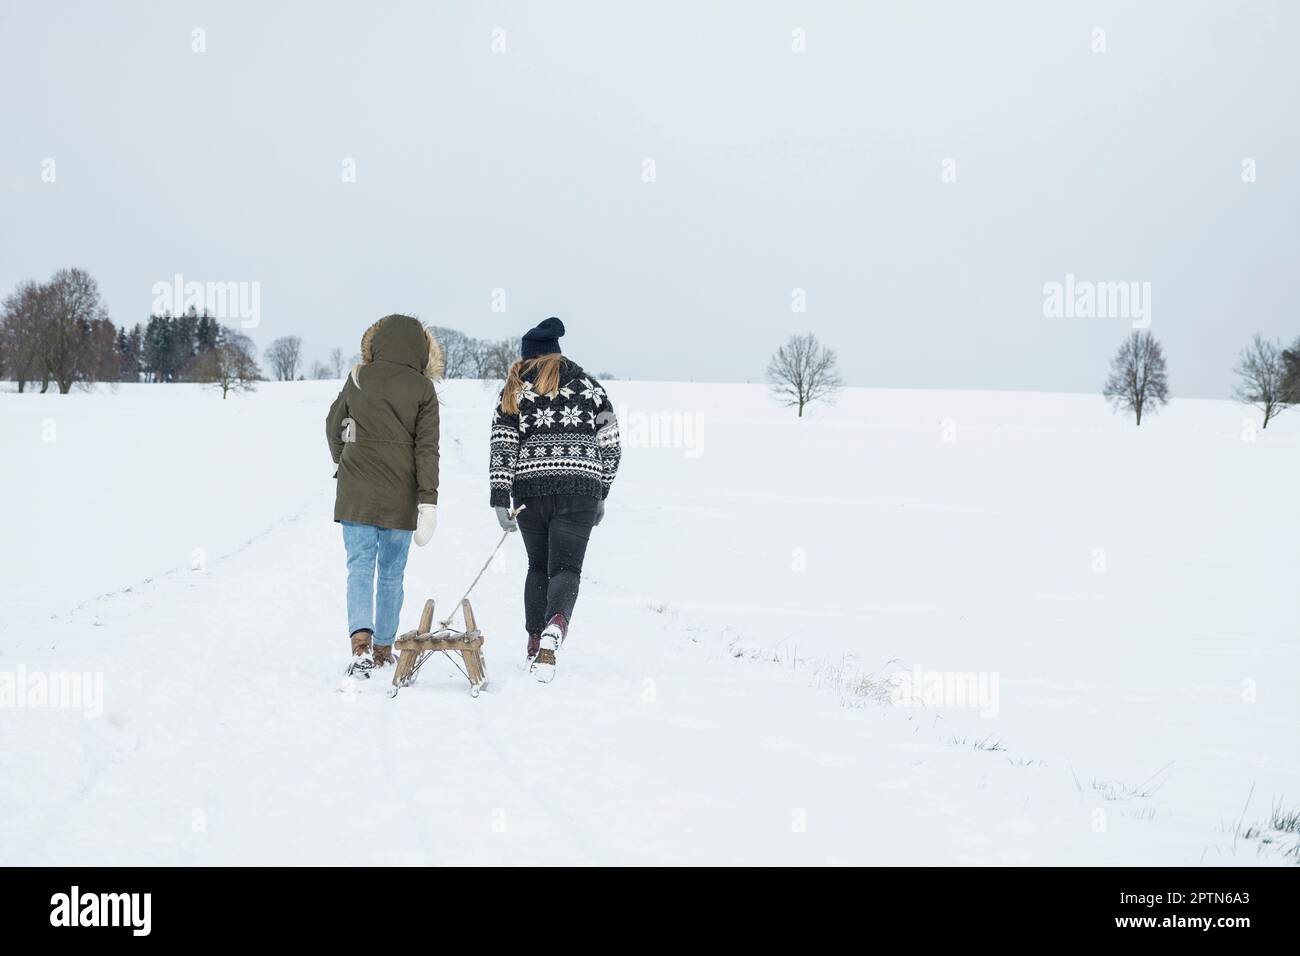 Two teenage girls with sled in snowy landscape in winter, Bavaria, Germany Stock Photo